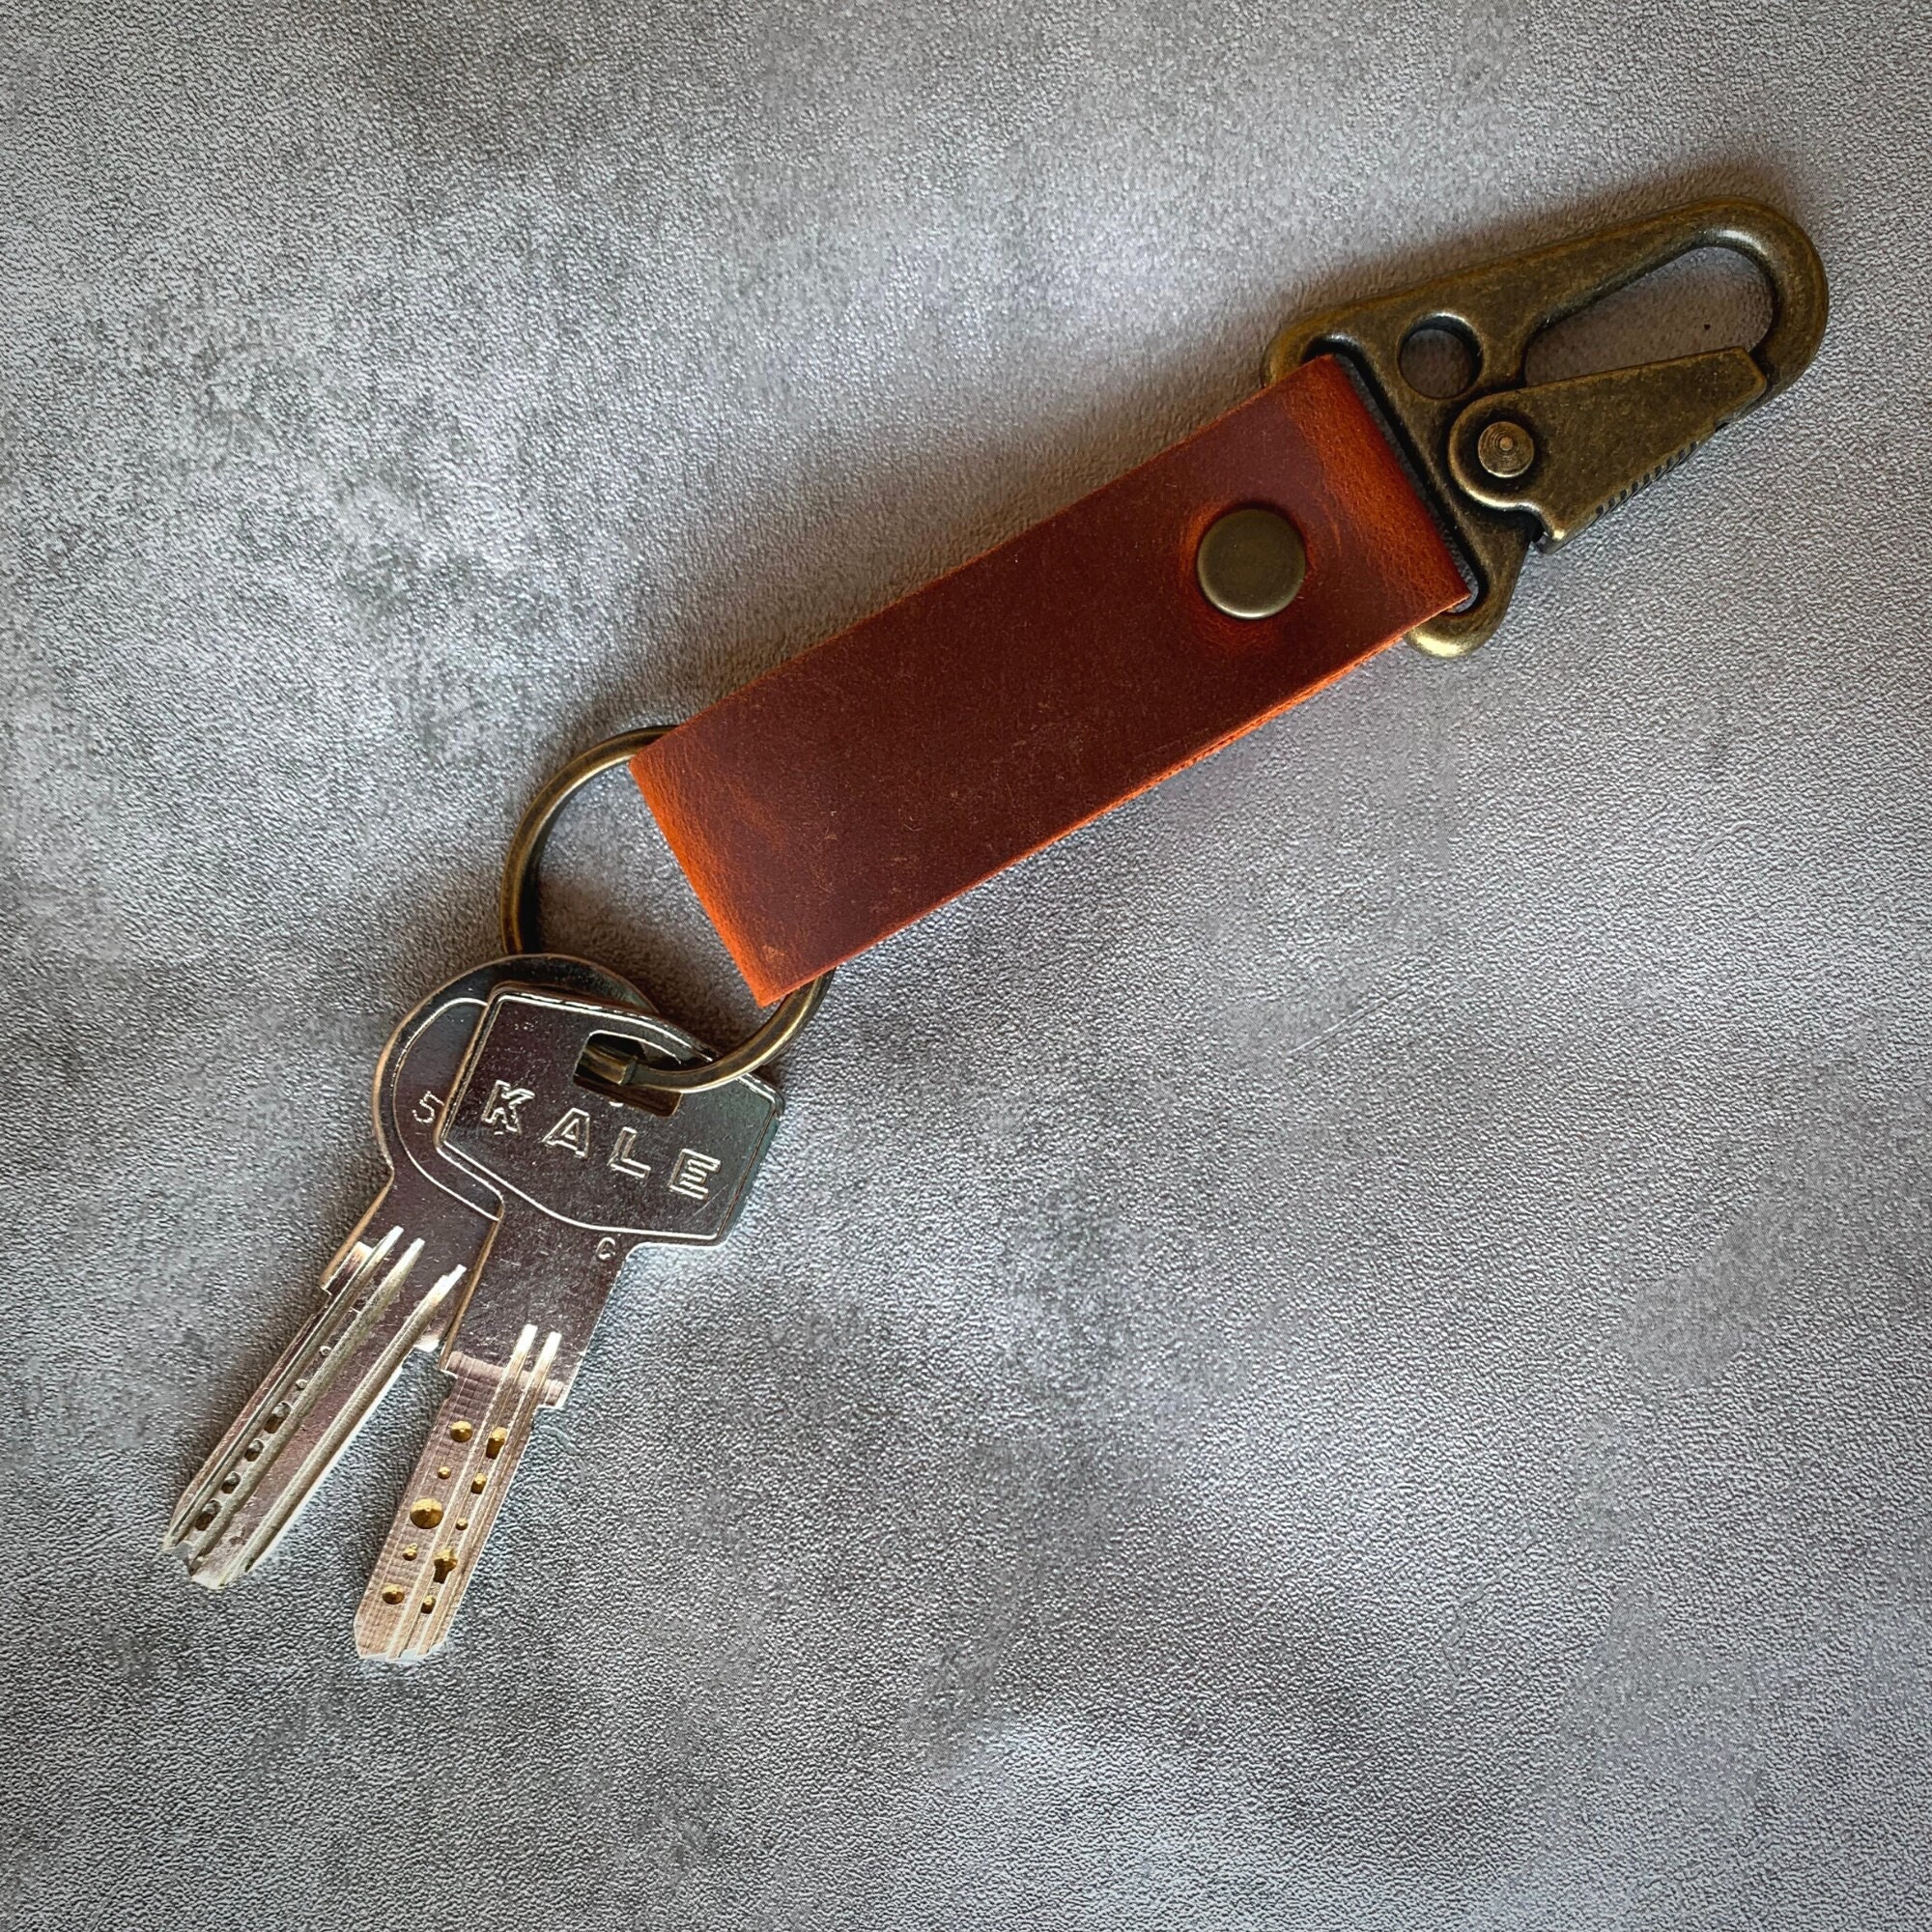 Suspension Clip, Key ring, Pocket EDC / Base with two options